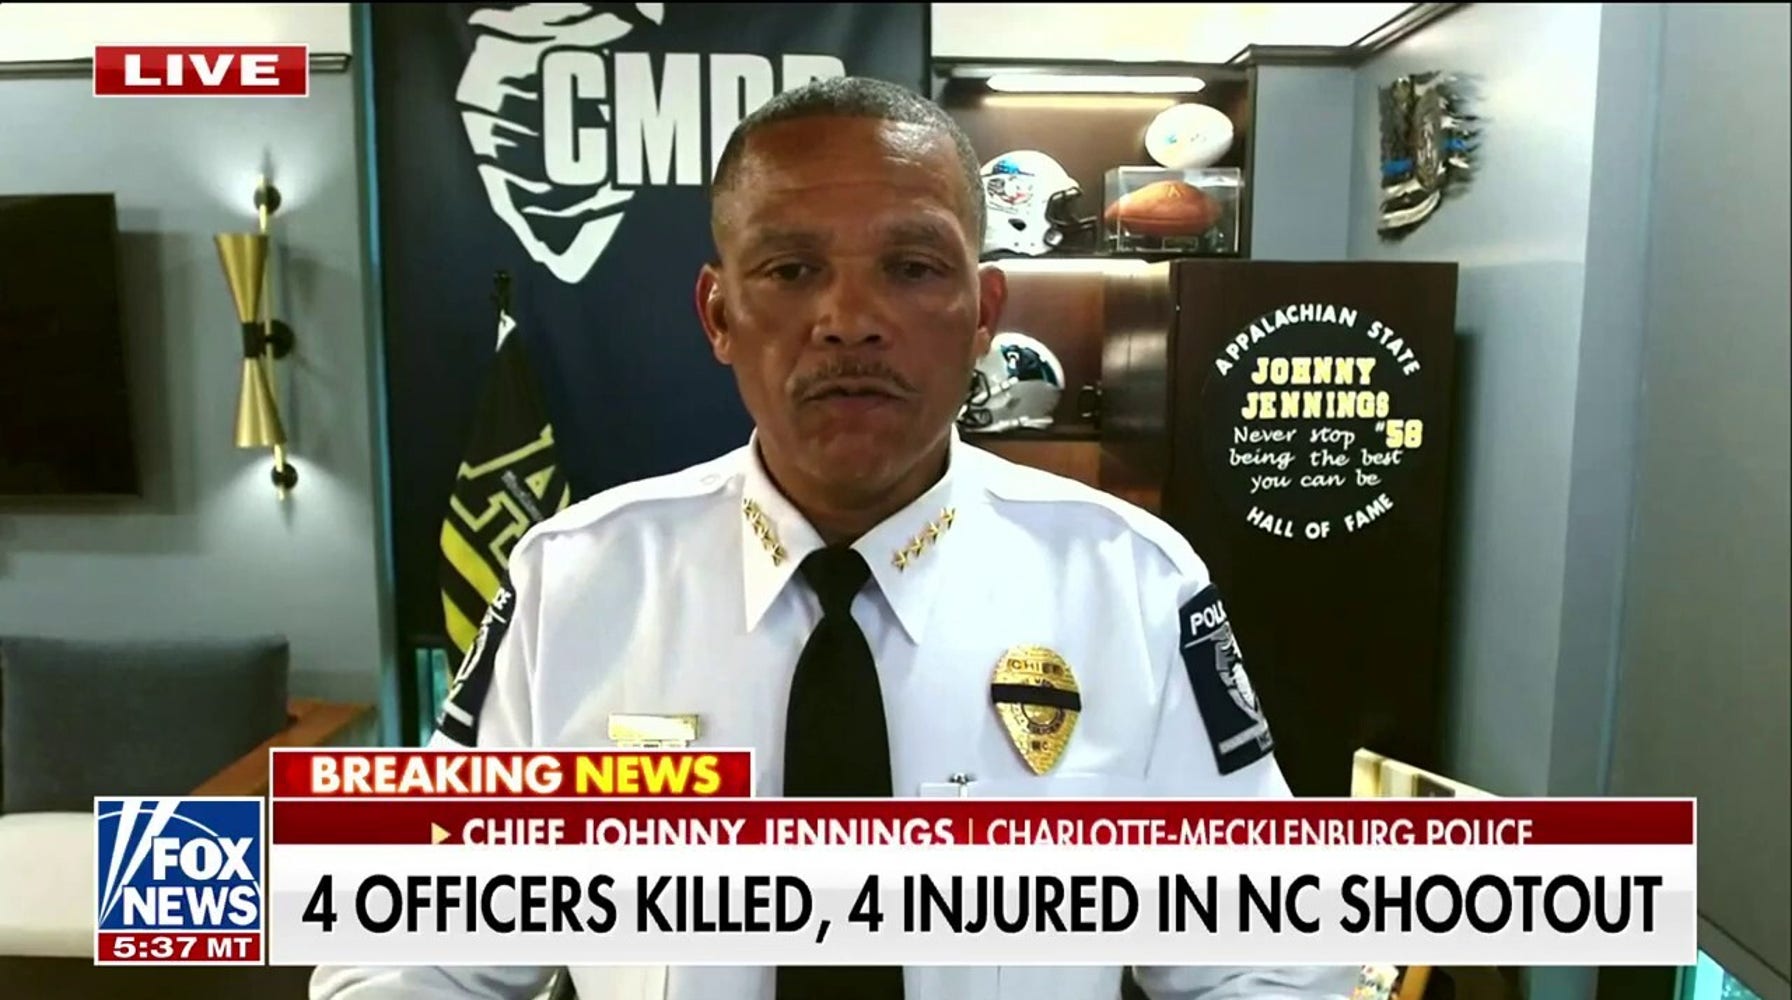 Charlotte Police Chief: Officers Killed in Shootout a 